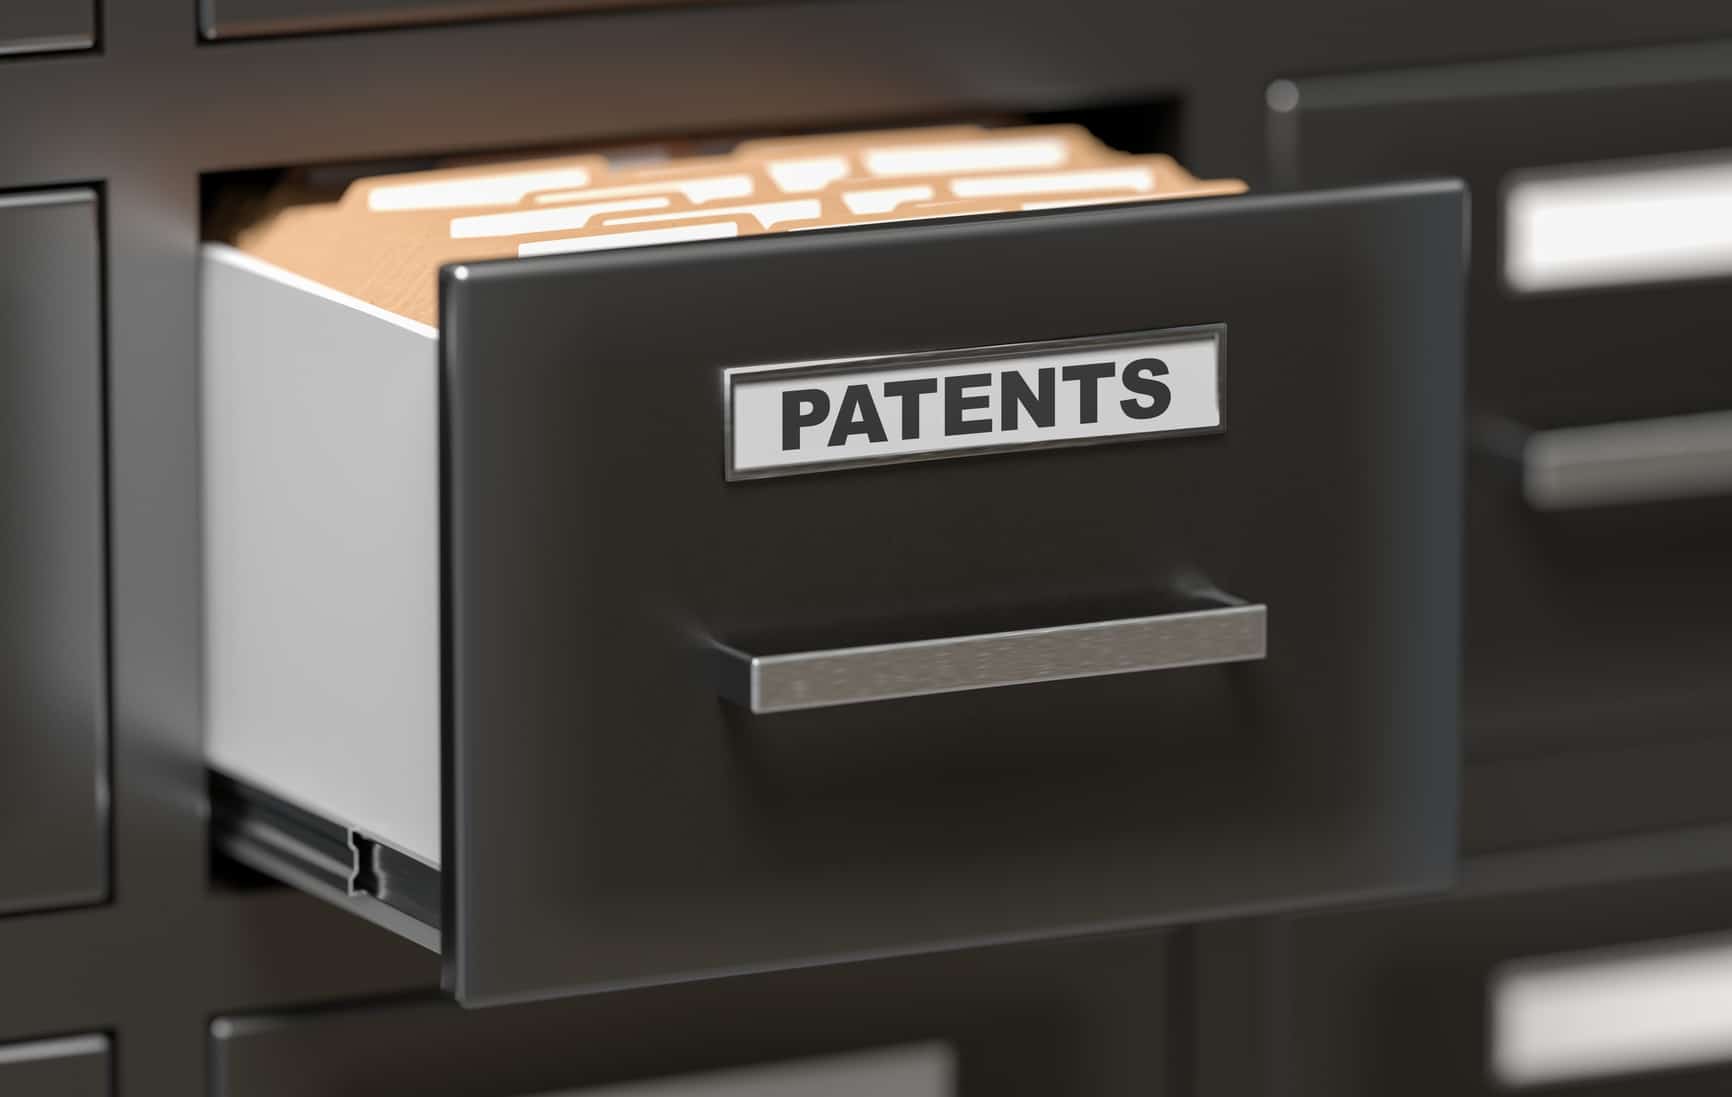 Patent files and documents in cabinet in office. 3D rendered illustration.